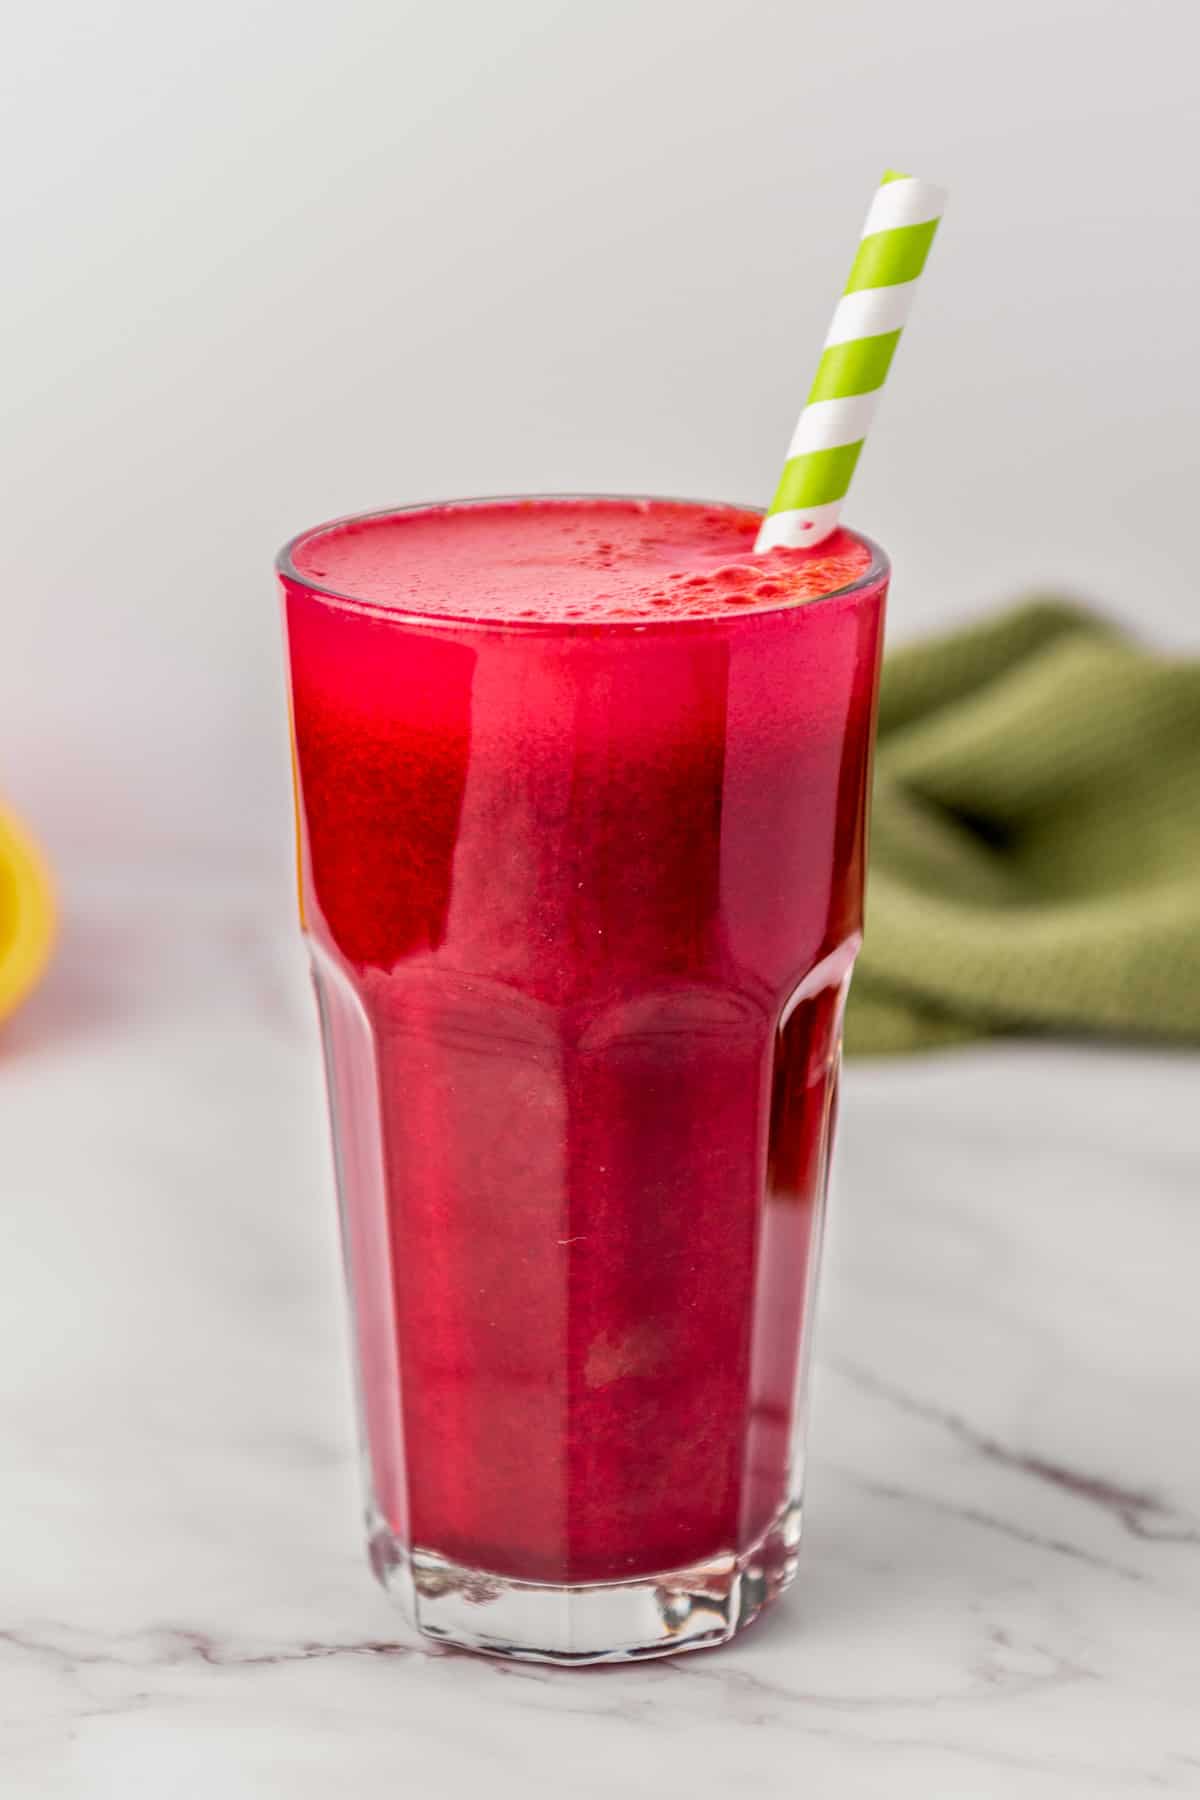 Beet carrot and orange juice in a glass.